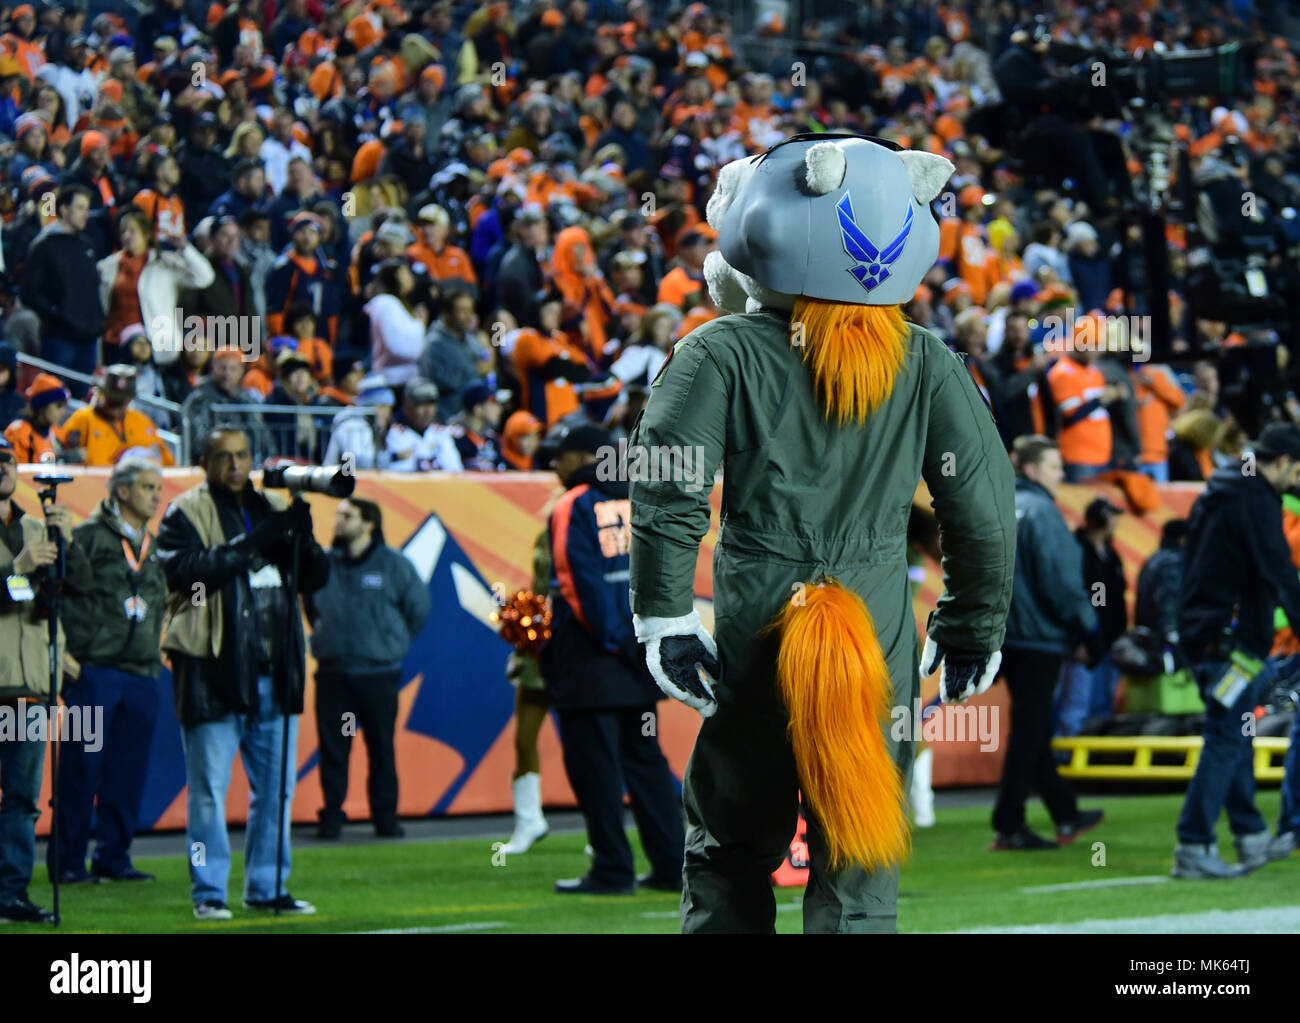 Miles, the Denver Broncos’ mascot, pumps up the crowd in his Air Force flight suit during the a Salute to Service game Nov. 12, 2017, at Sports Authority Stadium at Mile High in Denver. Miles wore a 120th Fighter Squadron patch on his left shoulder in support of the U.S. military. (U.S. Air Force photo by Airman 1st Class Holden S. Faul/ Released) Stock Photo